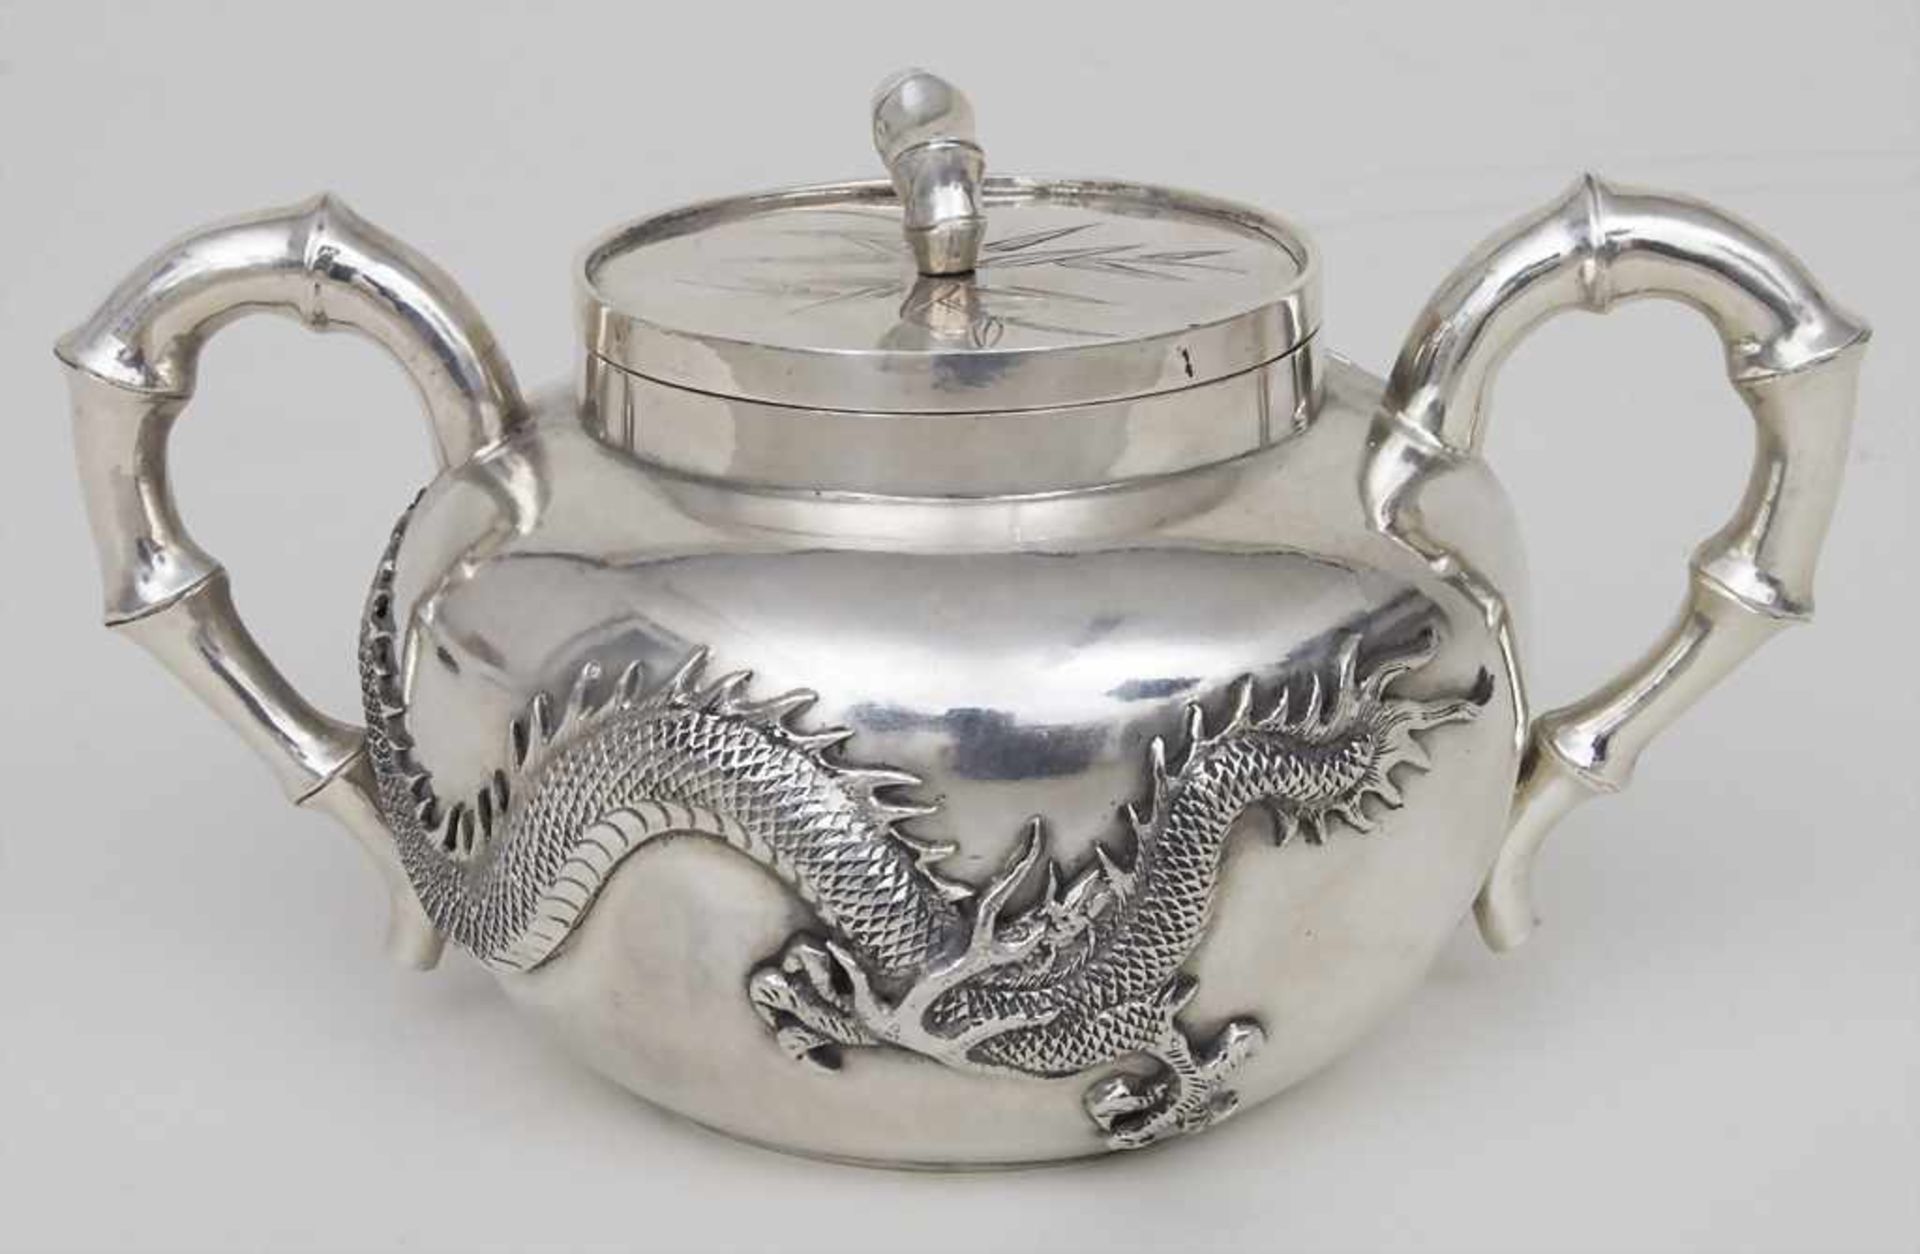 Zuckerdose mit Drachen / A Chinese export silver sugar bowl with a dragon, Wing Nam & Co. (1875- - Image 2 of 6